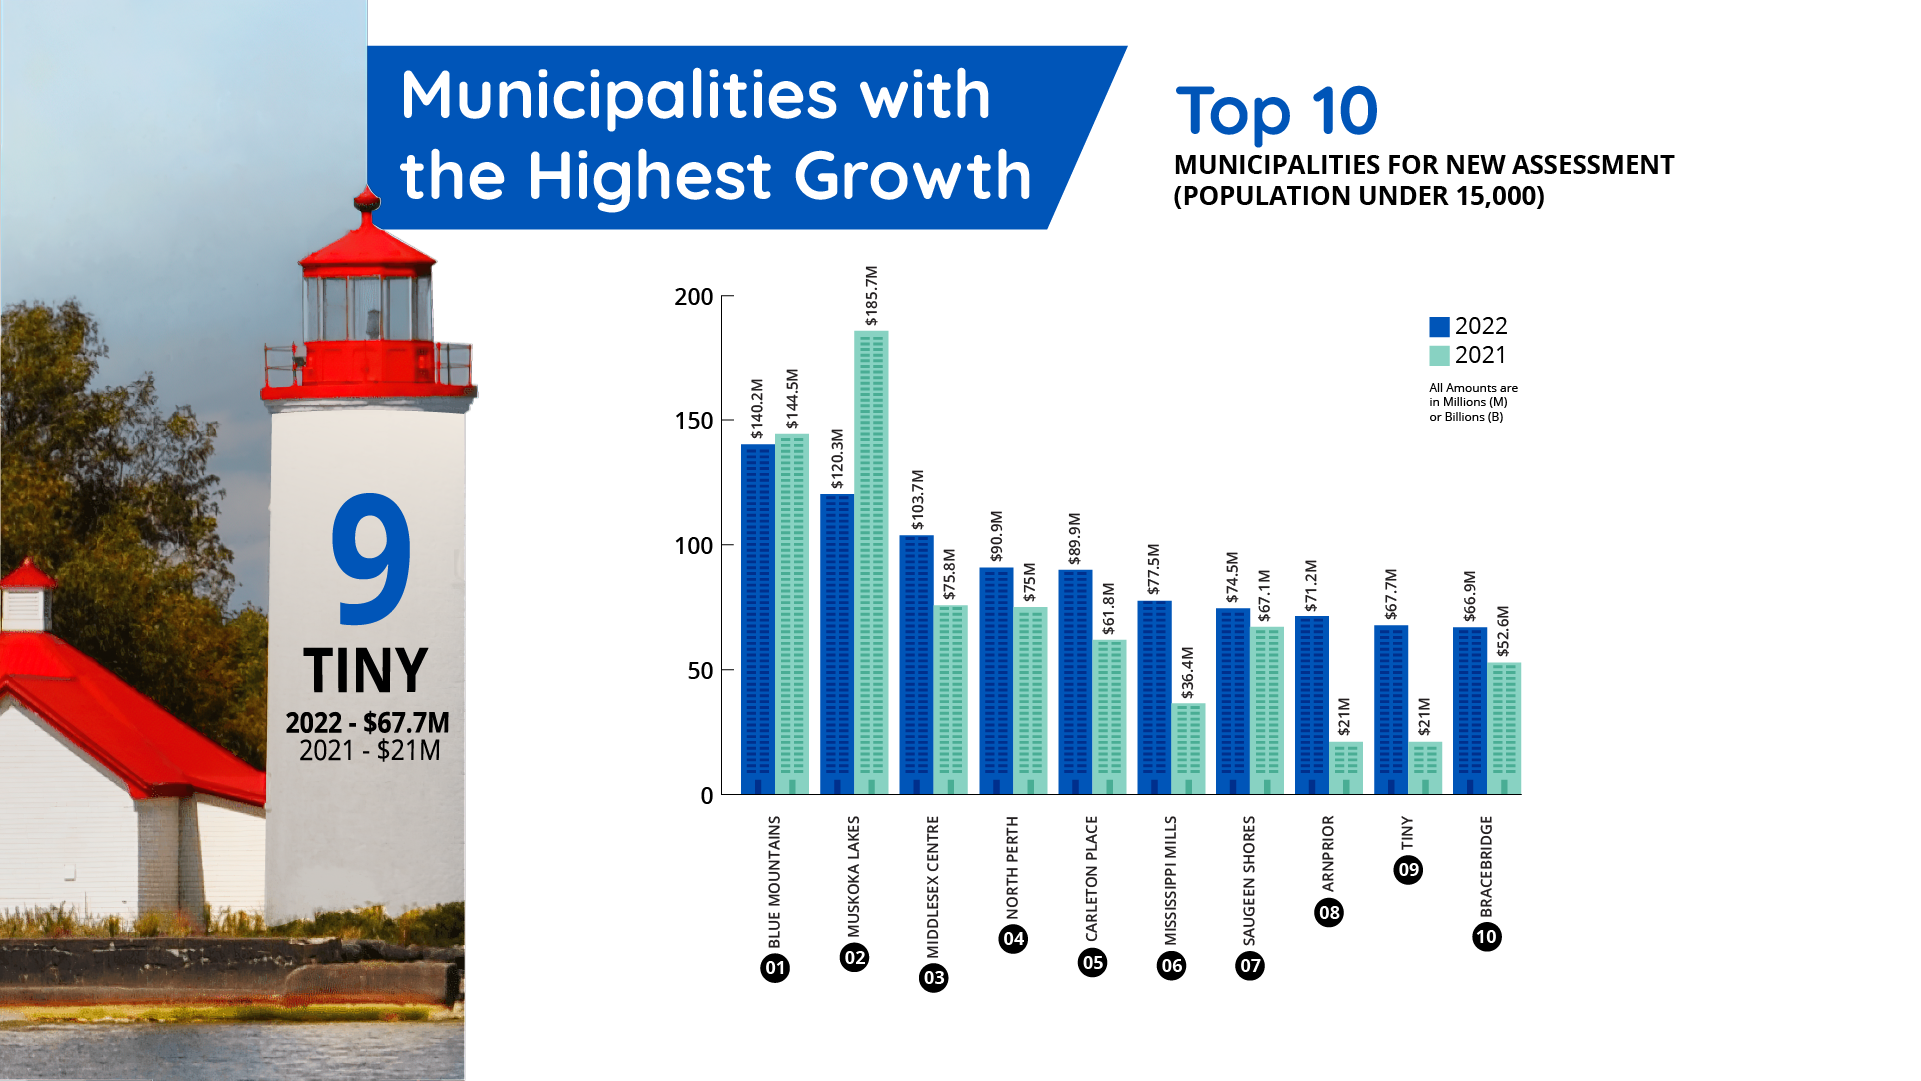 Visual of the top 10 municipalities for new assessment in populations under 15,000.